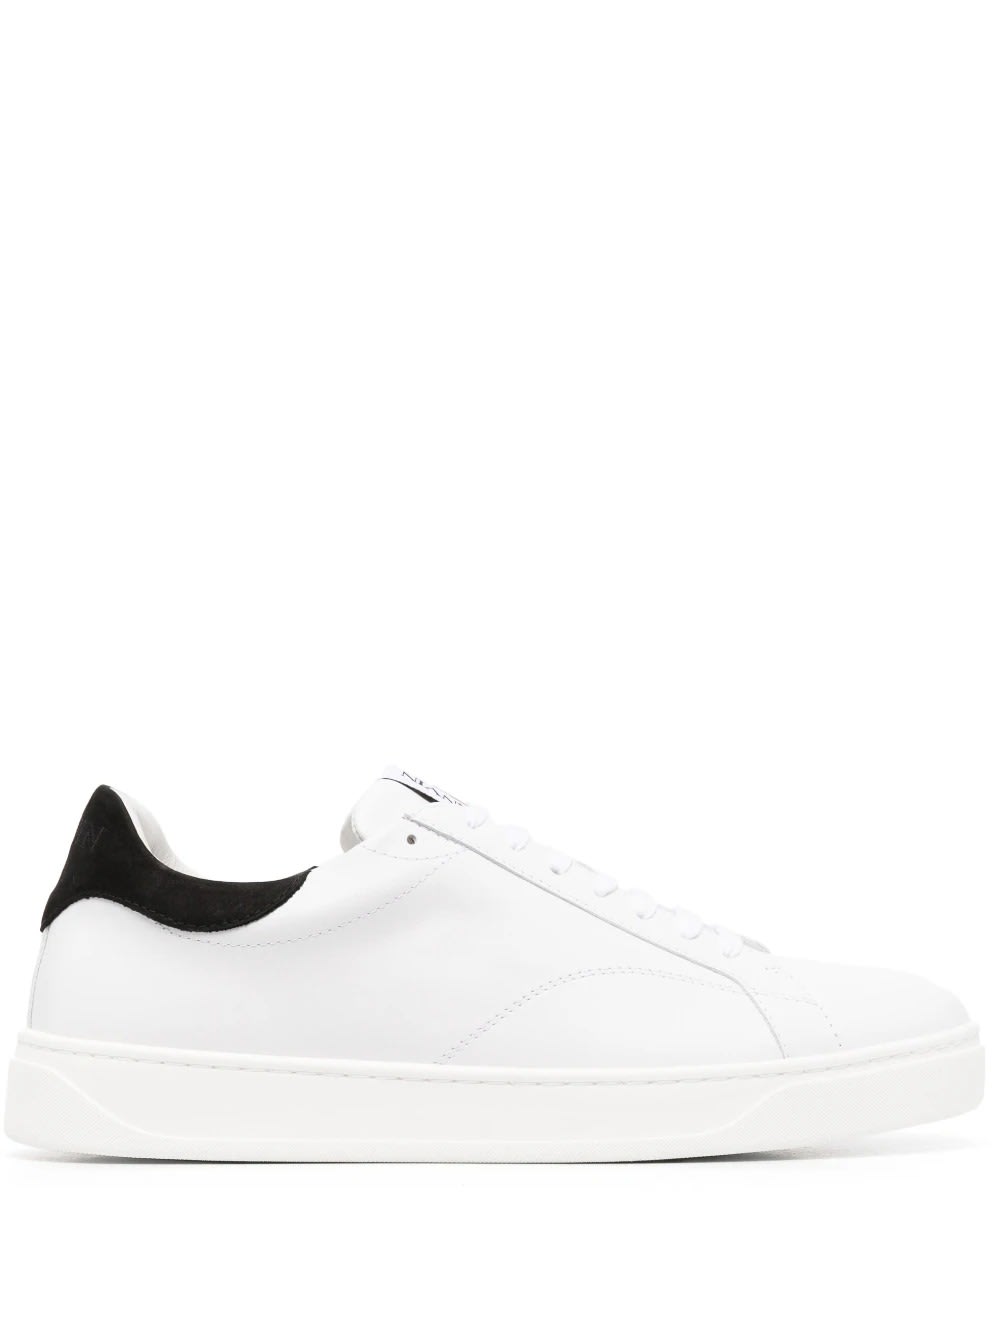 Lanvin White And Black Ddb0 Sneakers